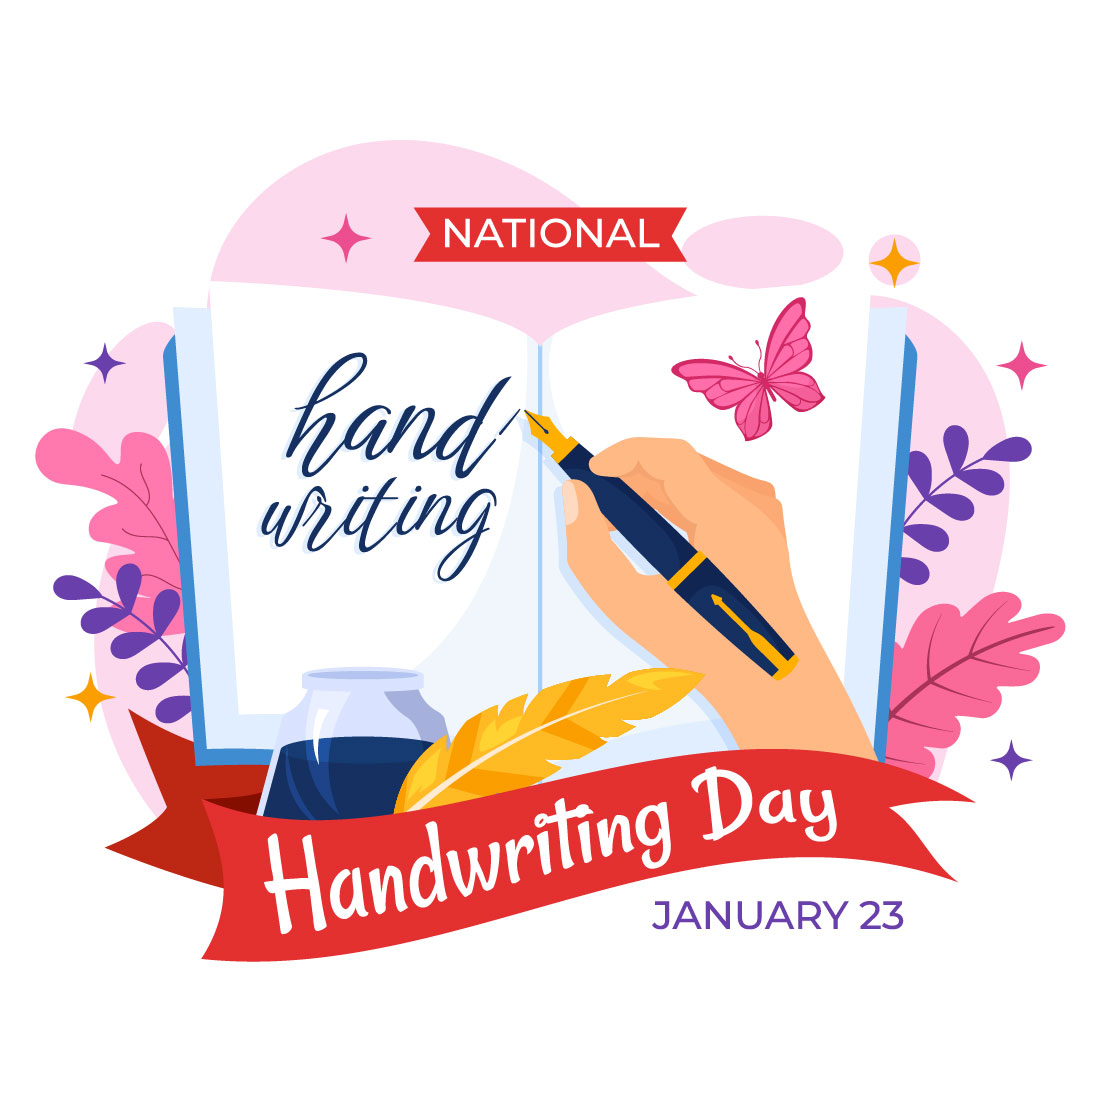 12 National Handwriting Day Illustration cover image.